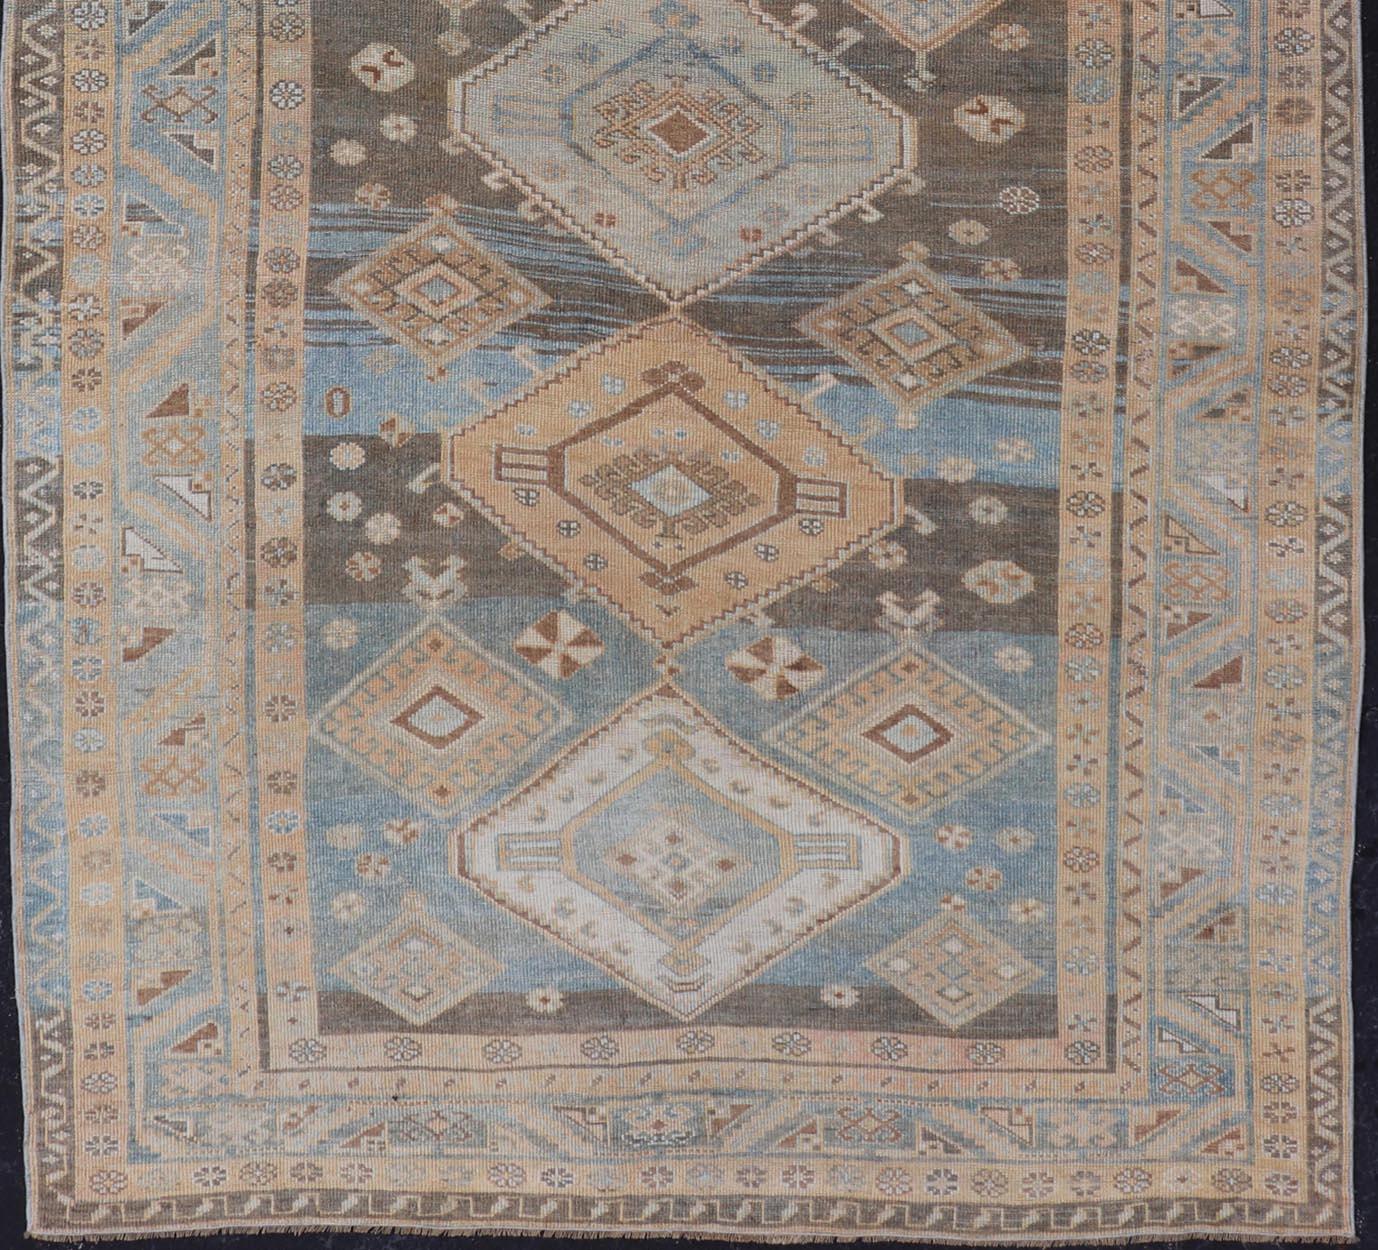 Antique Persian Kurdish Rug with All-Over Tribal in Blue, Green, and Brown In Good Condition For Sale In Atlanta, GA